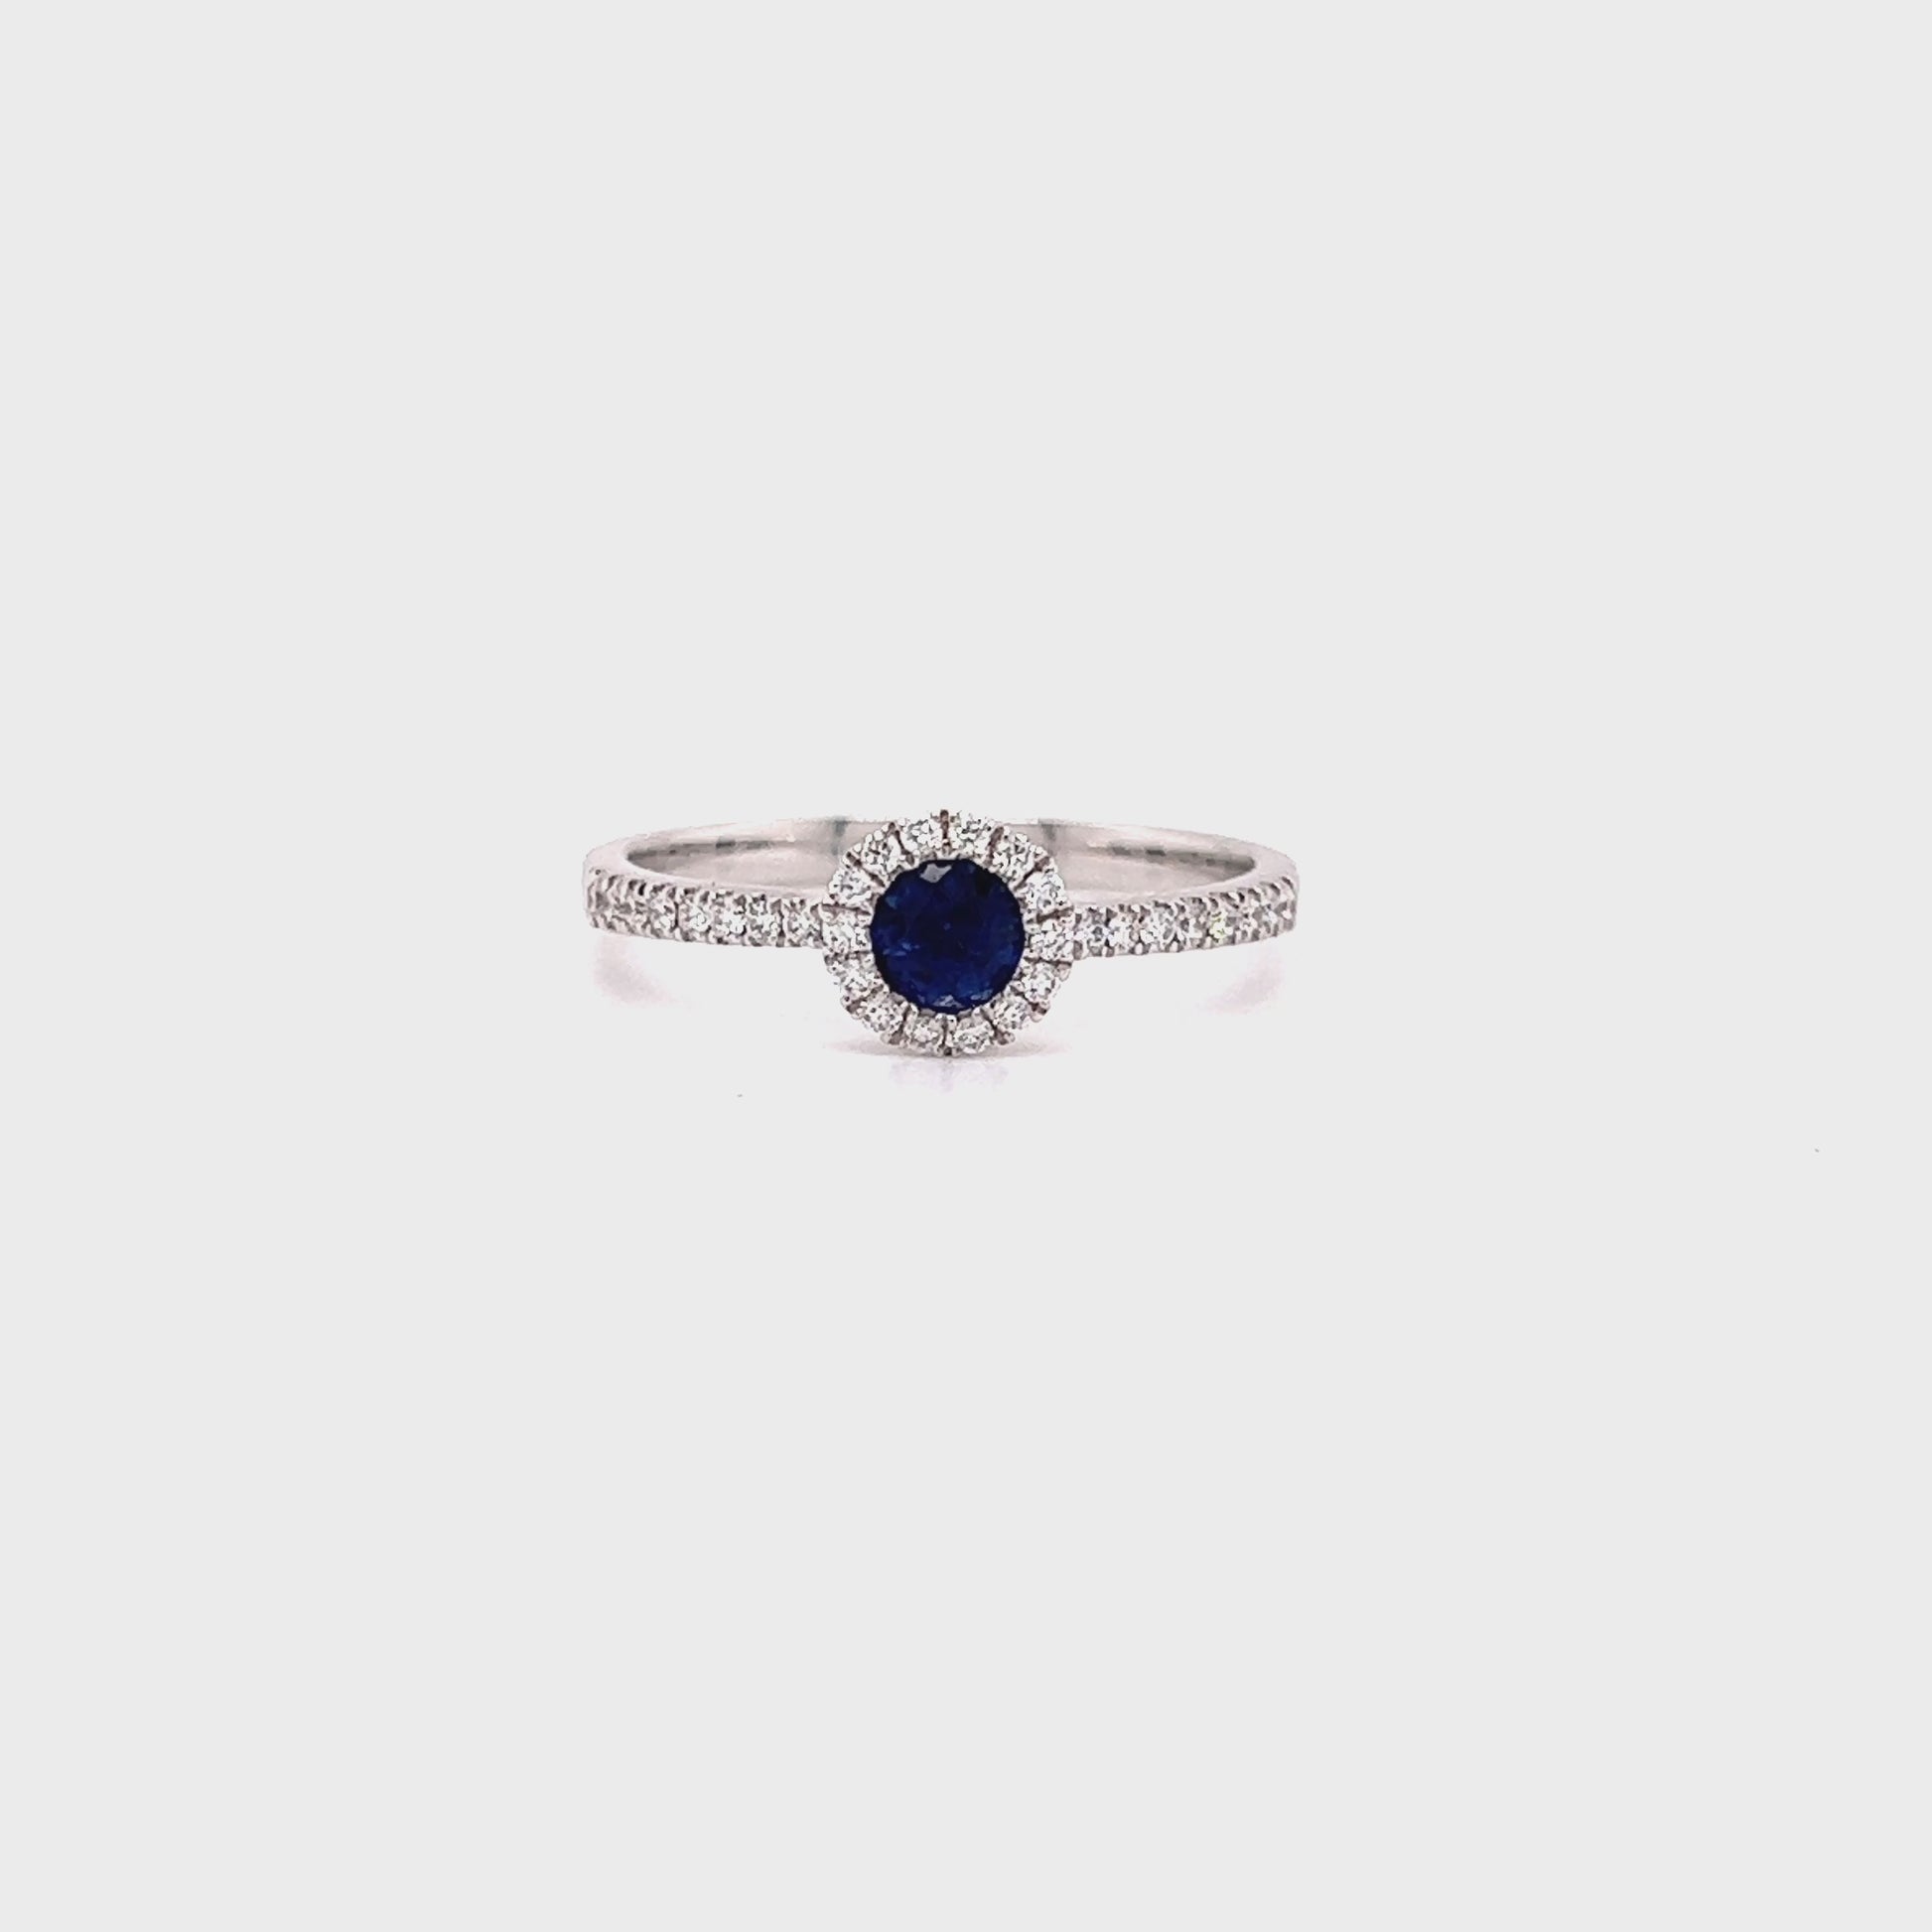 Sapphire Bezel Ring with Diamond Halo in 14K While Gold Video